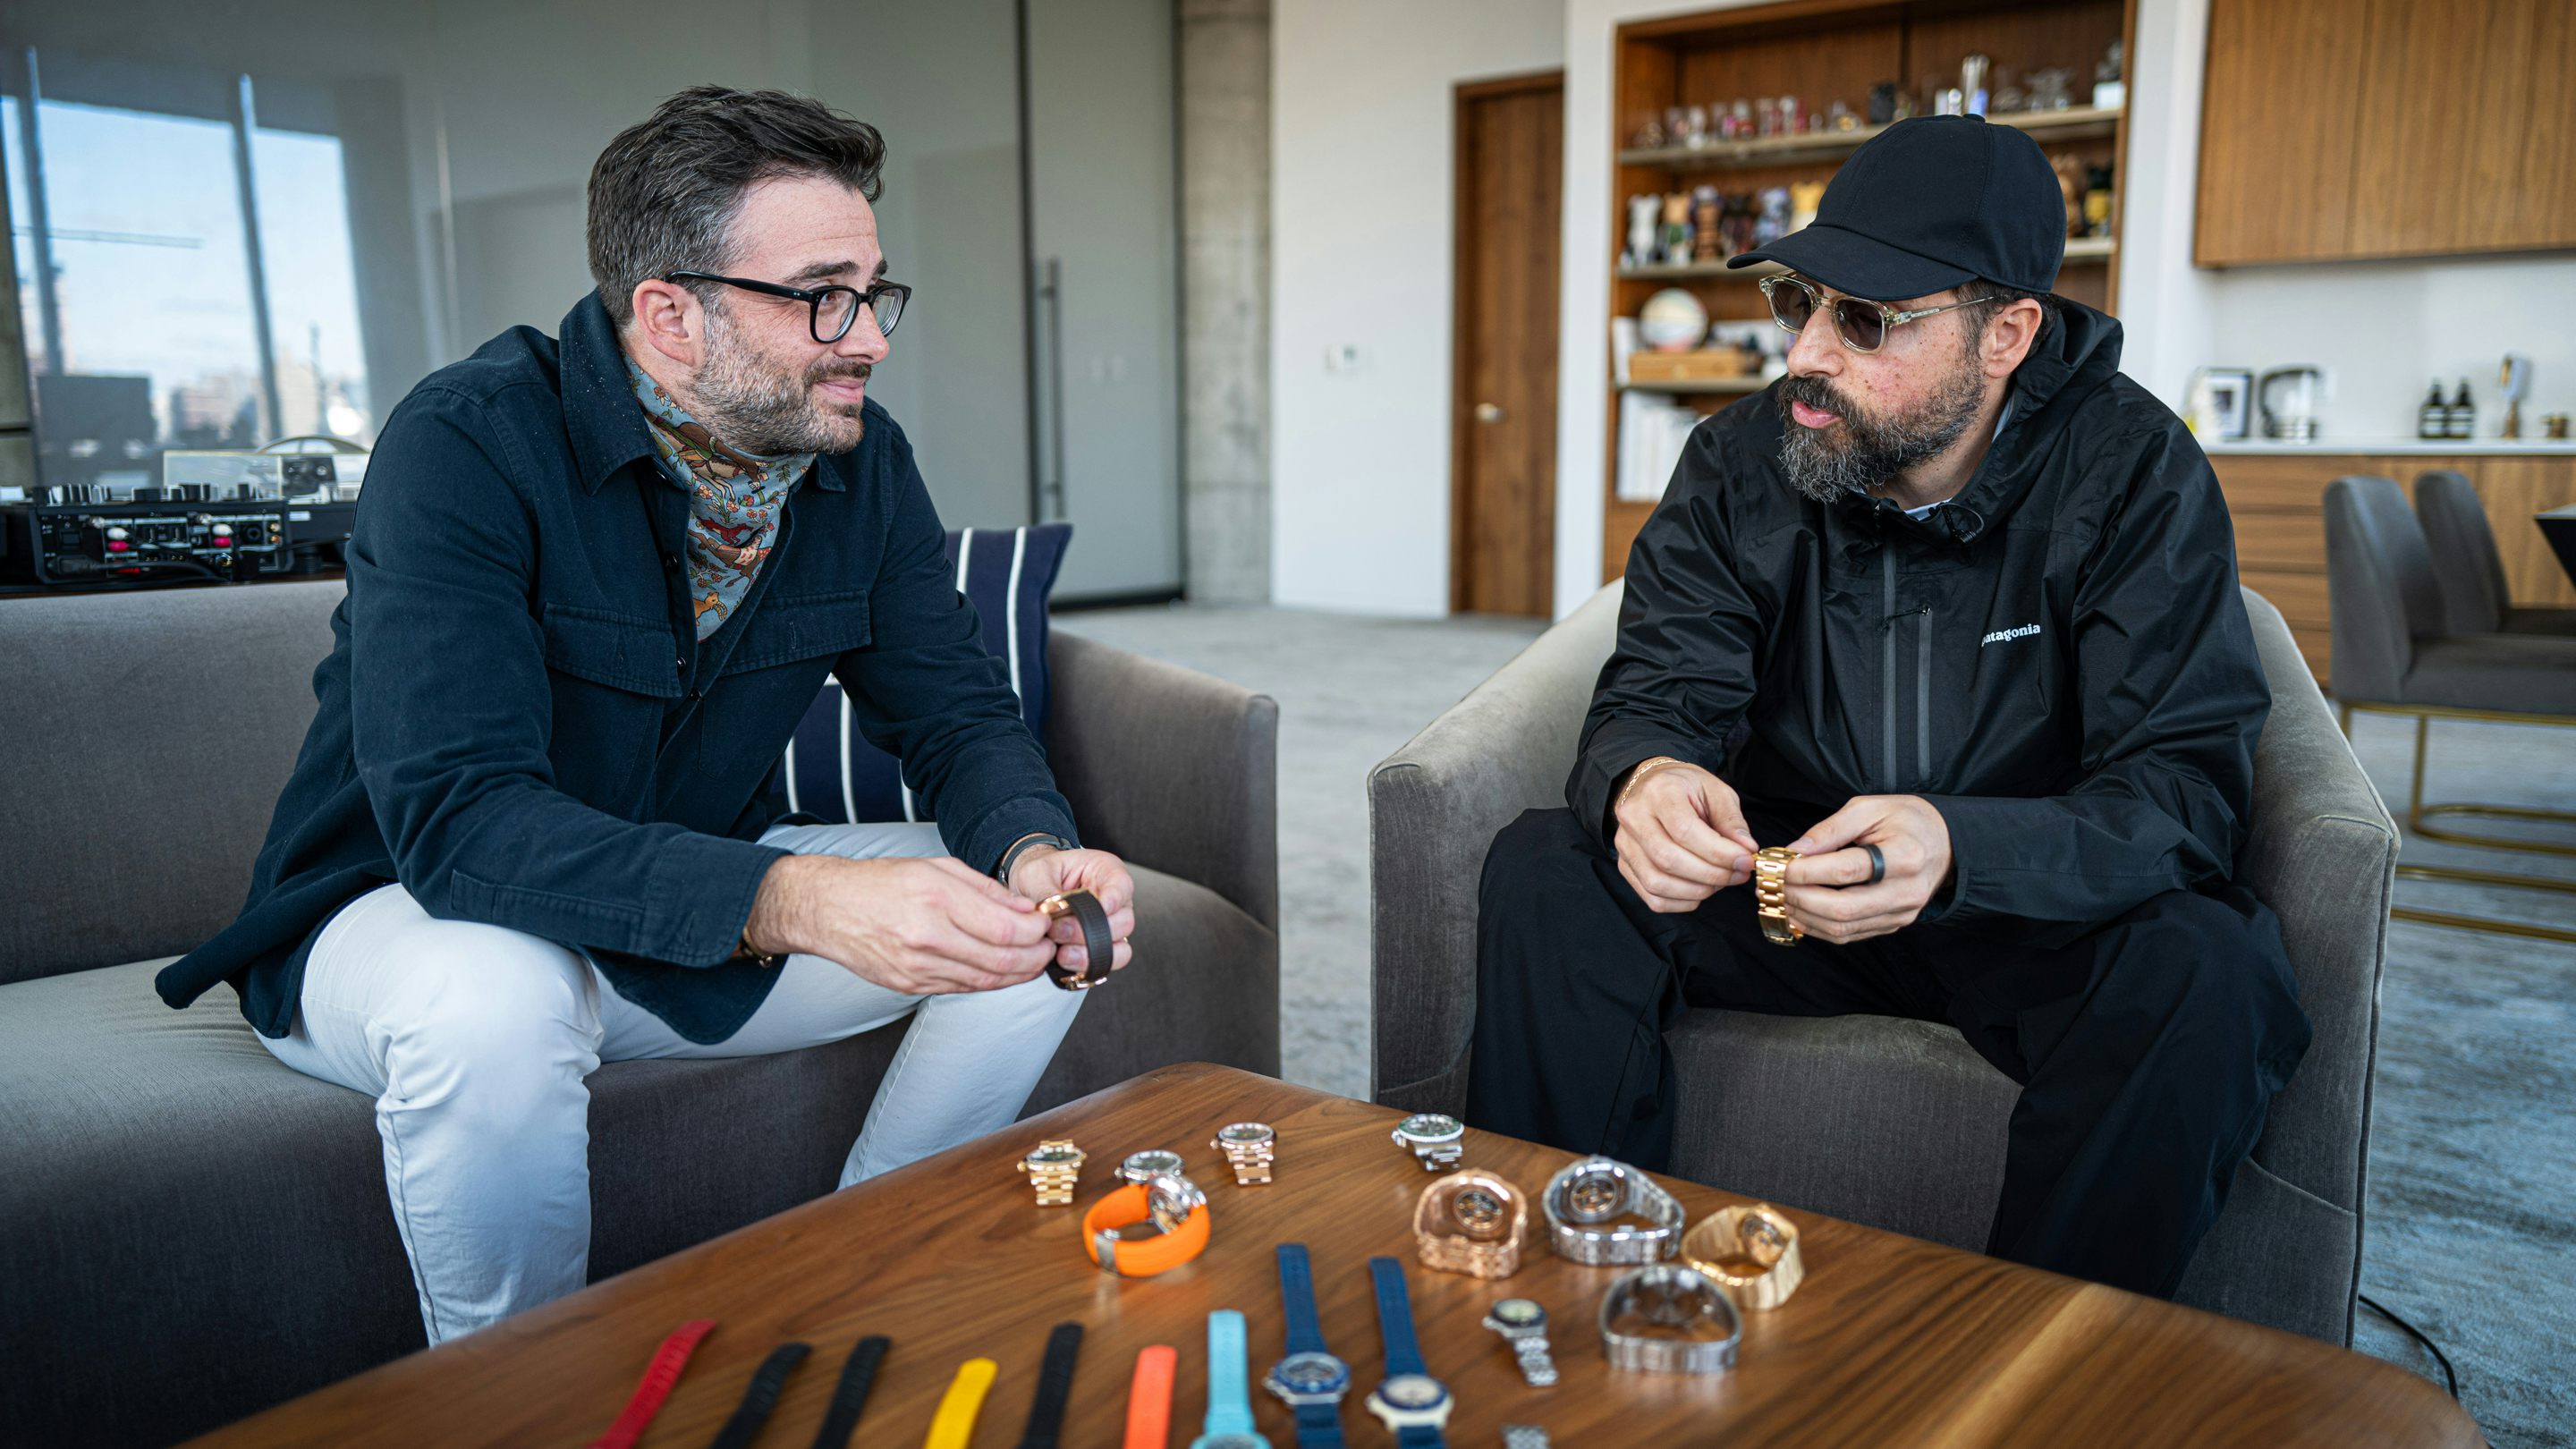 Hodinkee founder Benjamin Clymer and KITH owner-operator Ronnie Fieg sit side by side in a large office space discussing the watch collection on the table in front of them